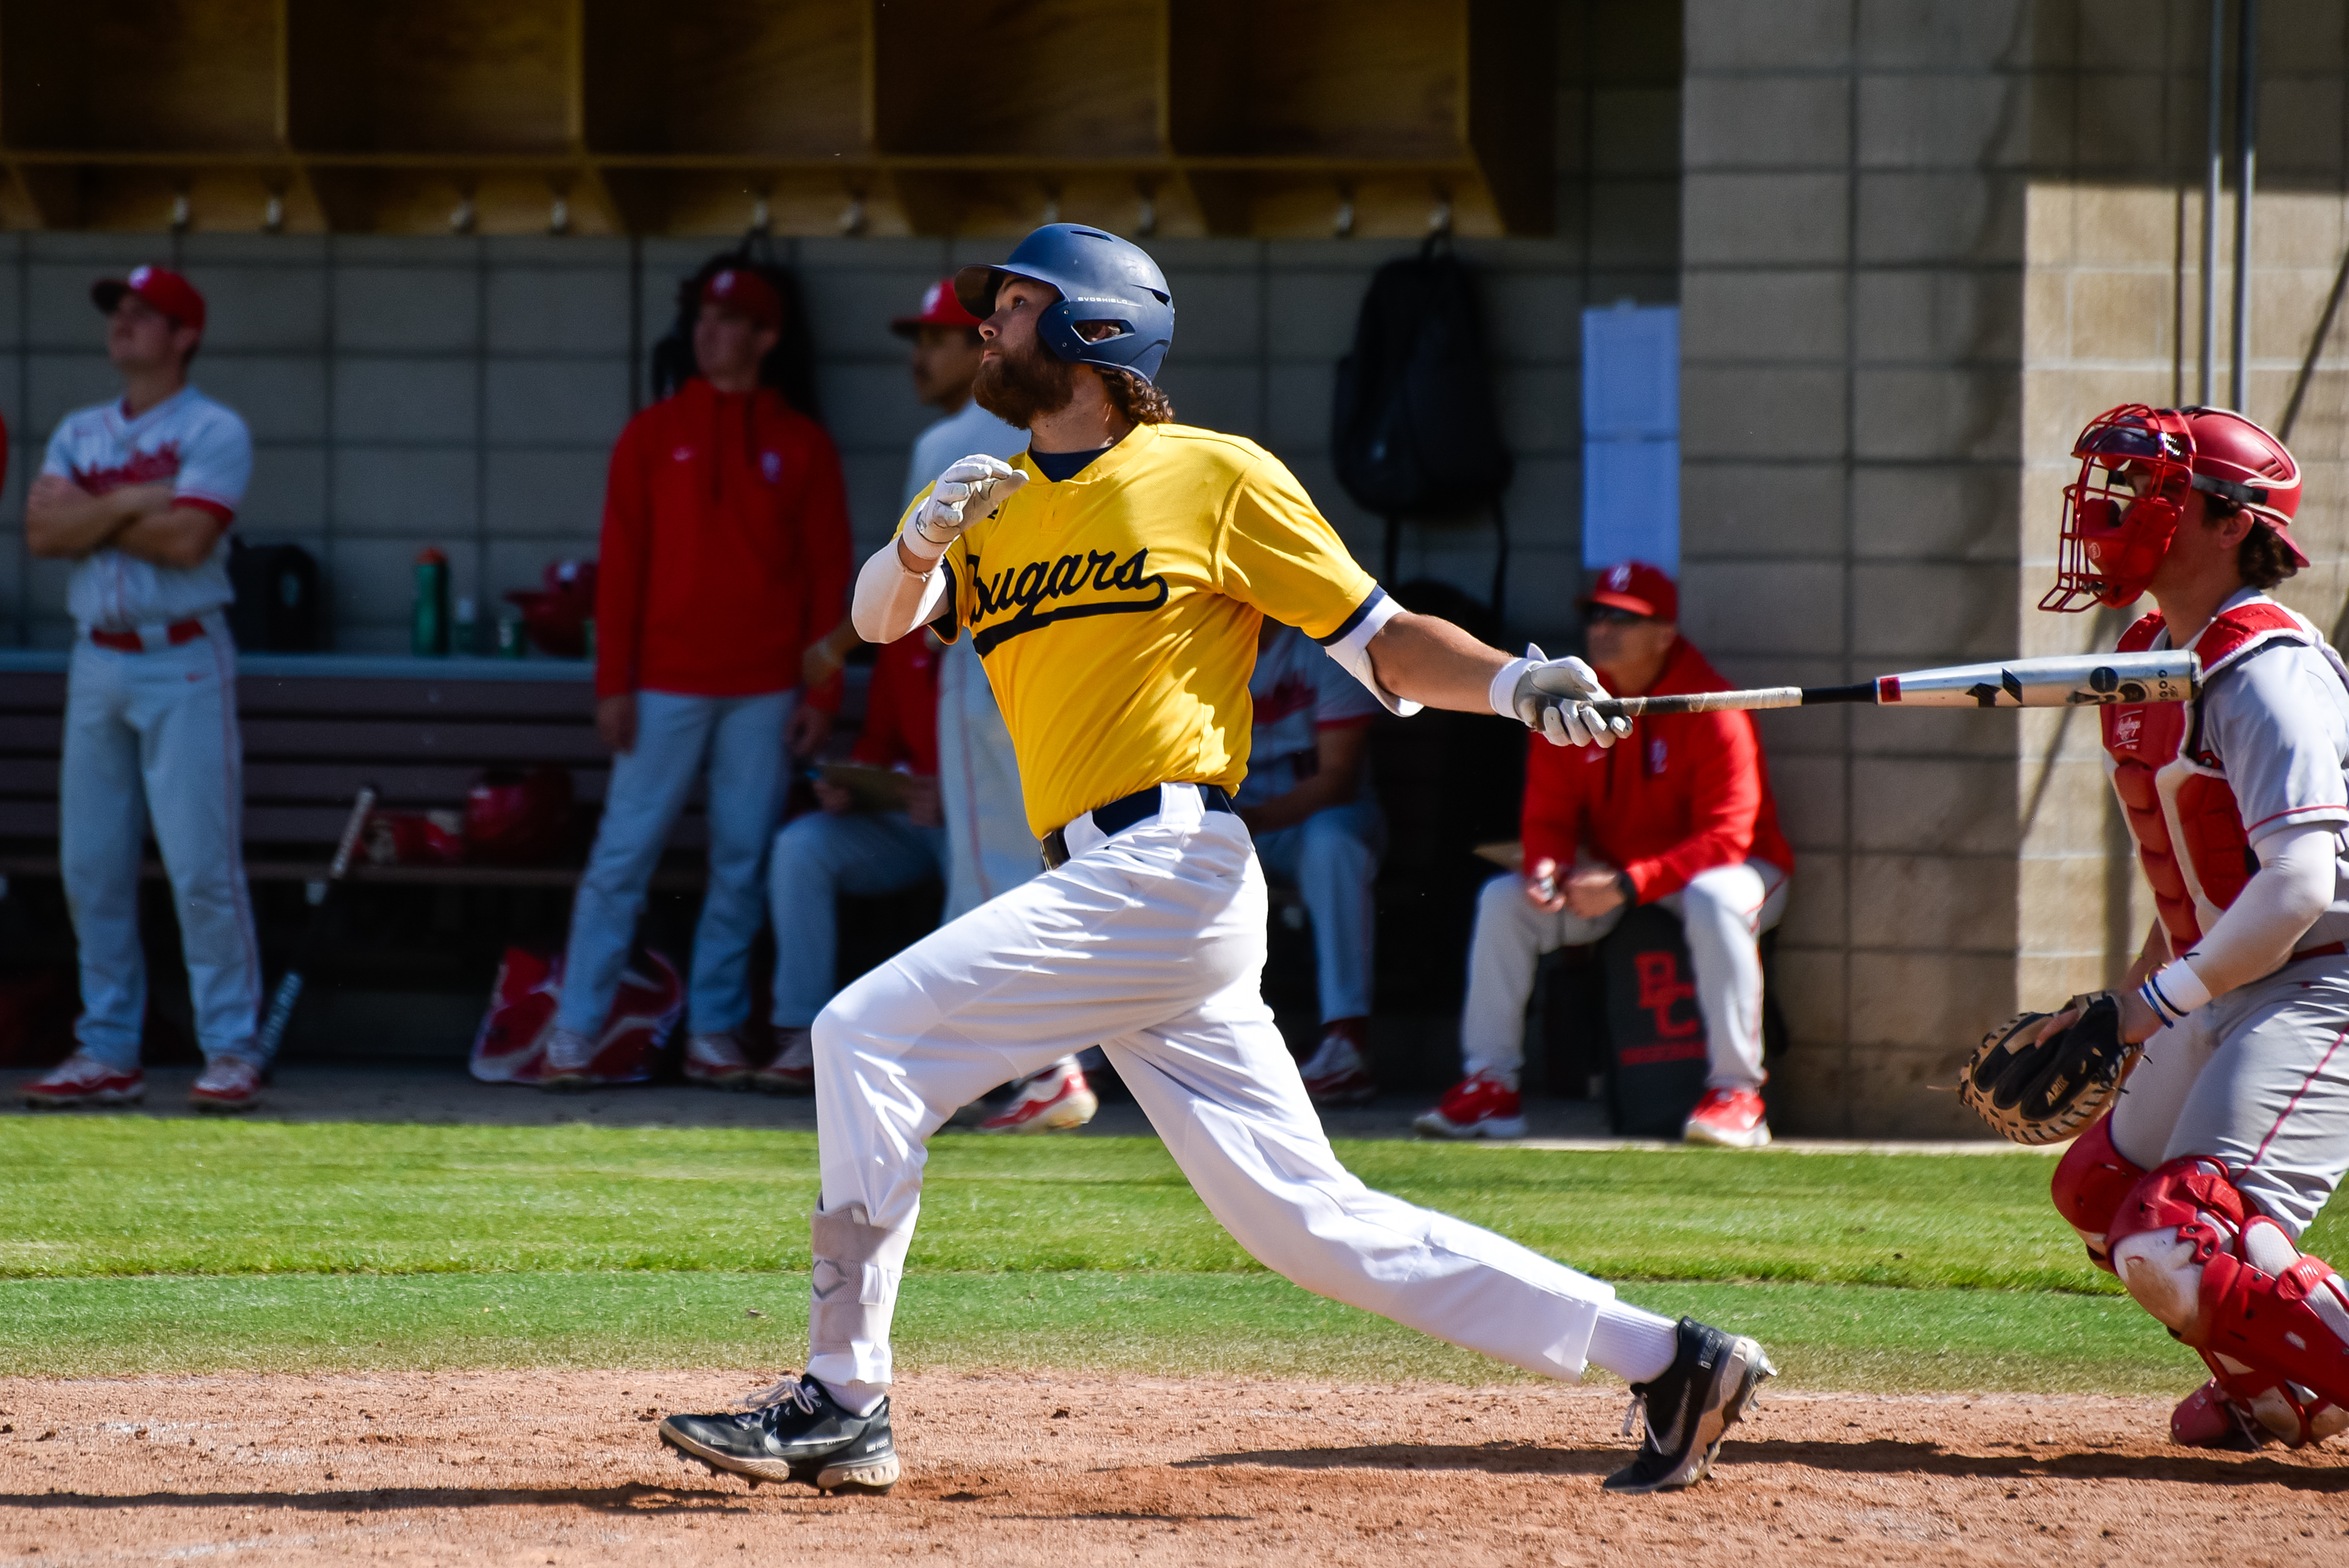 Stock image of College of the Canyons baseball player Jayden Steinhurst vs. Bakersfield College on Tuesday, march 12.